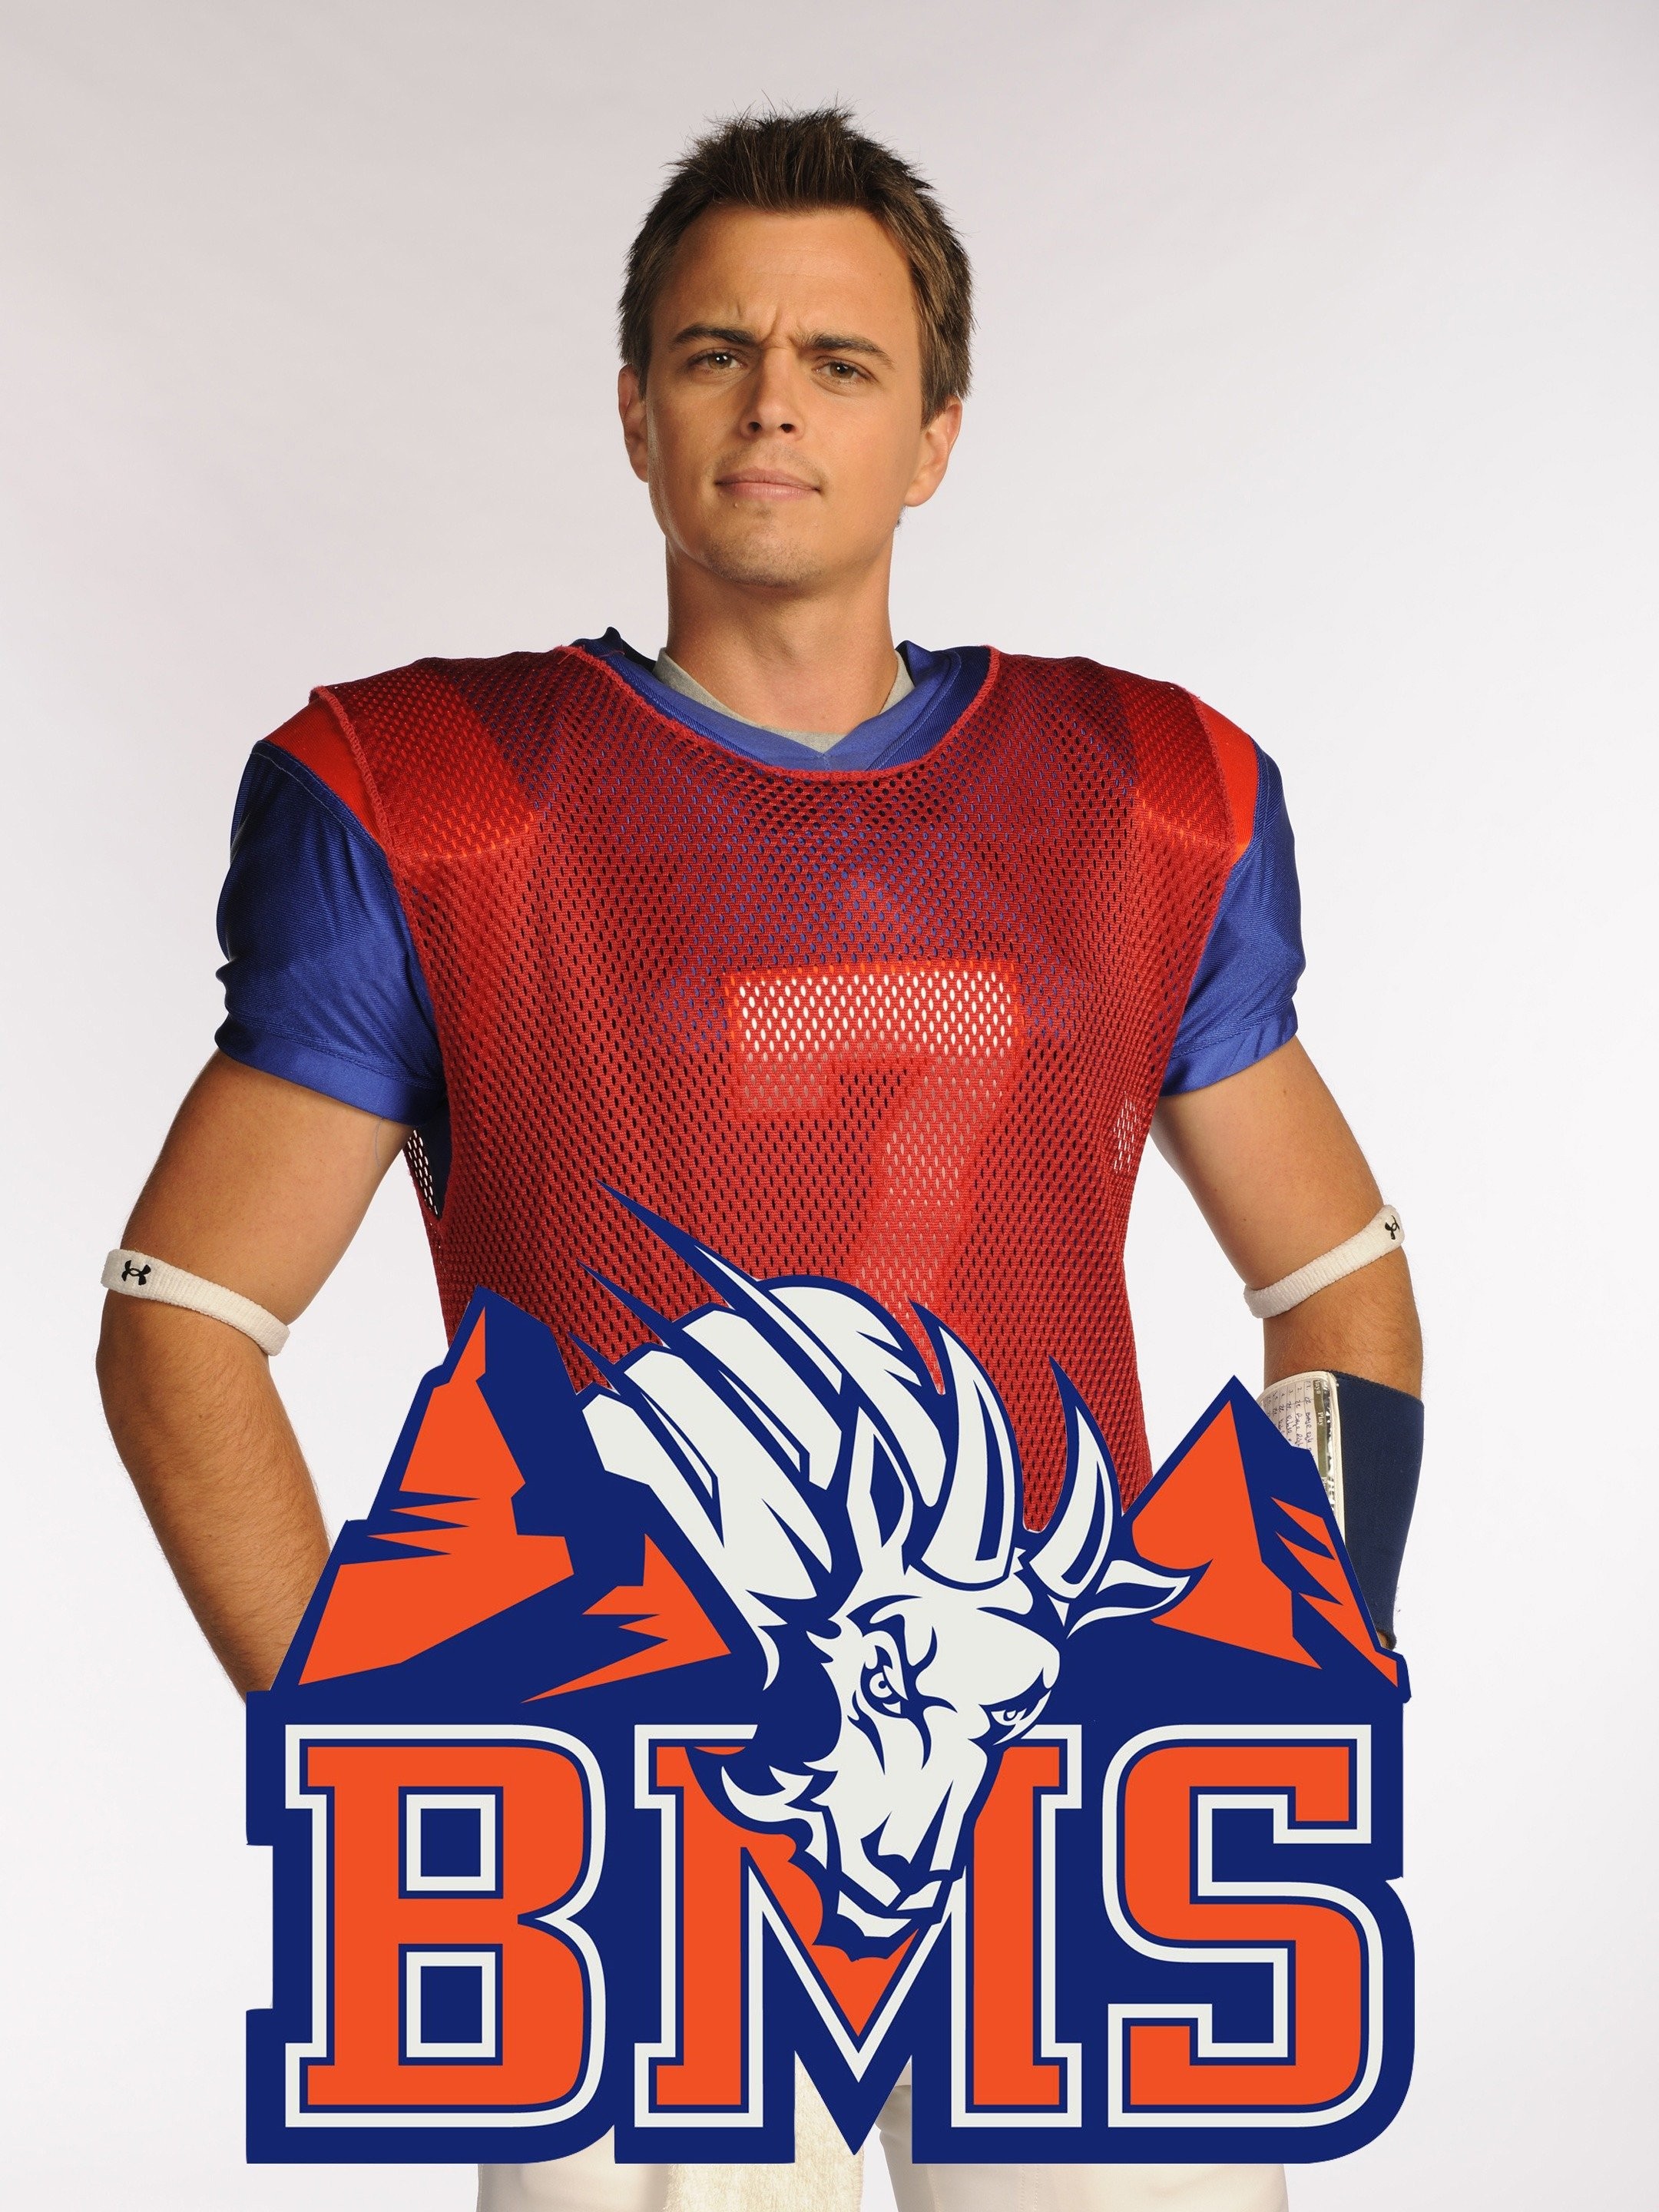 Thad Castle #54 Blue Mountain State NCAA Football Jersey - Top Smart Design